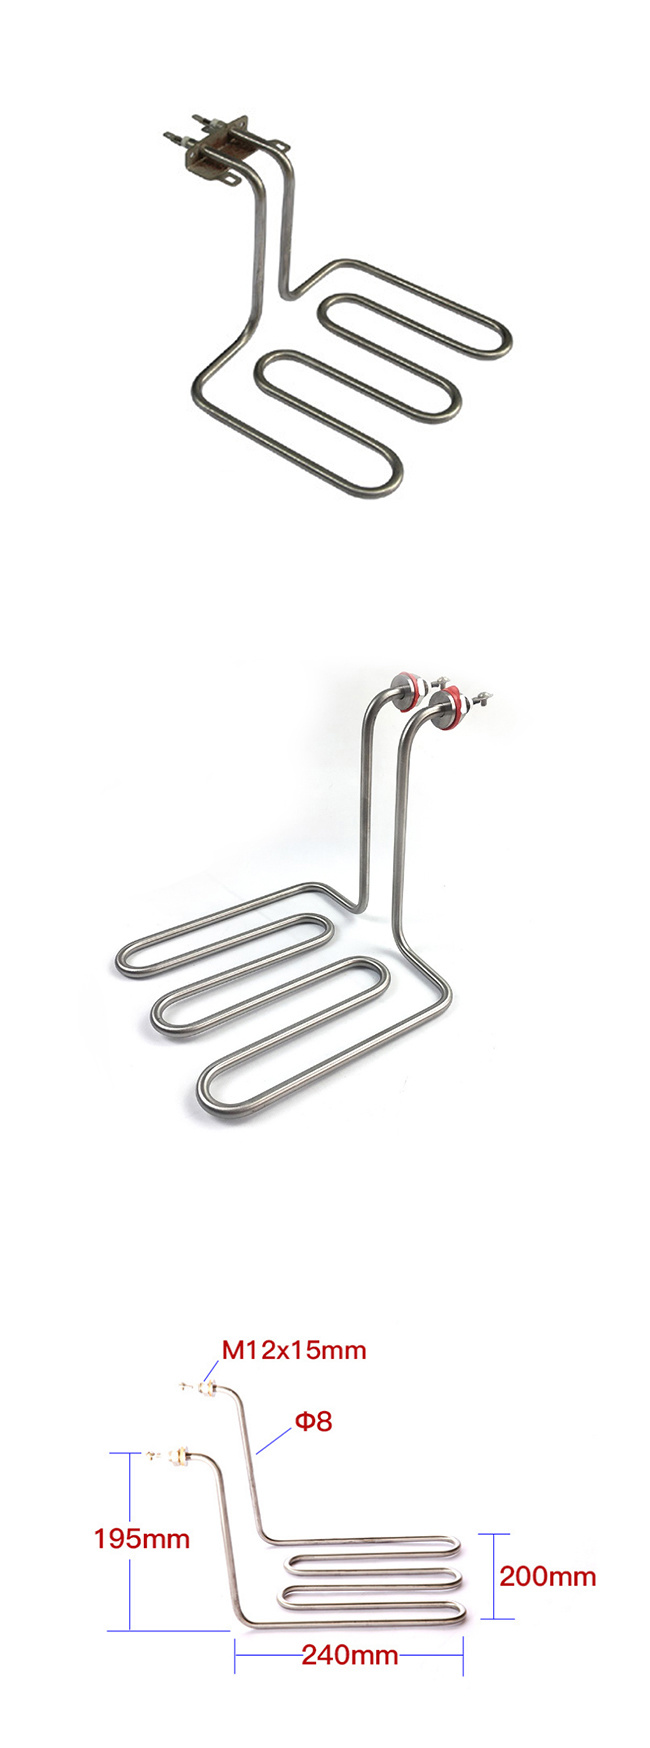 Deep Fryer Electrical Heating Element for Kitchen Appliance